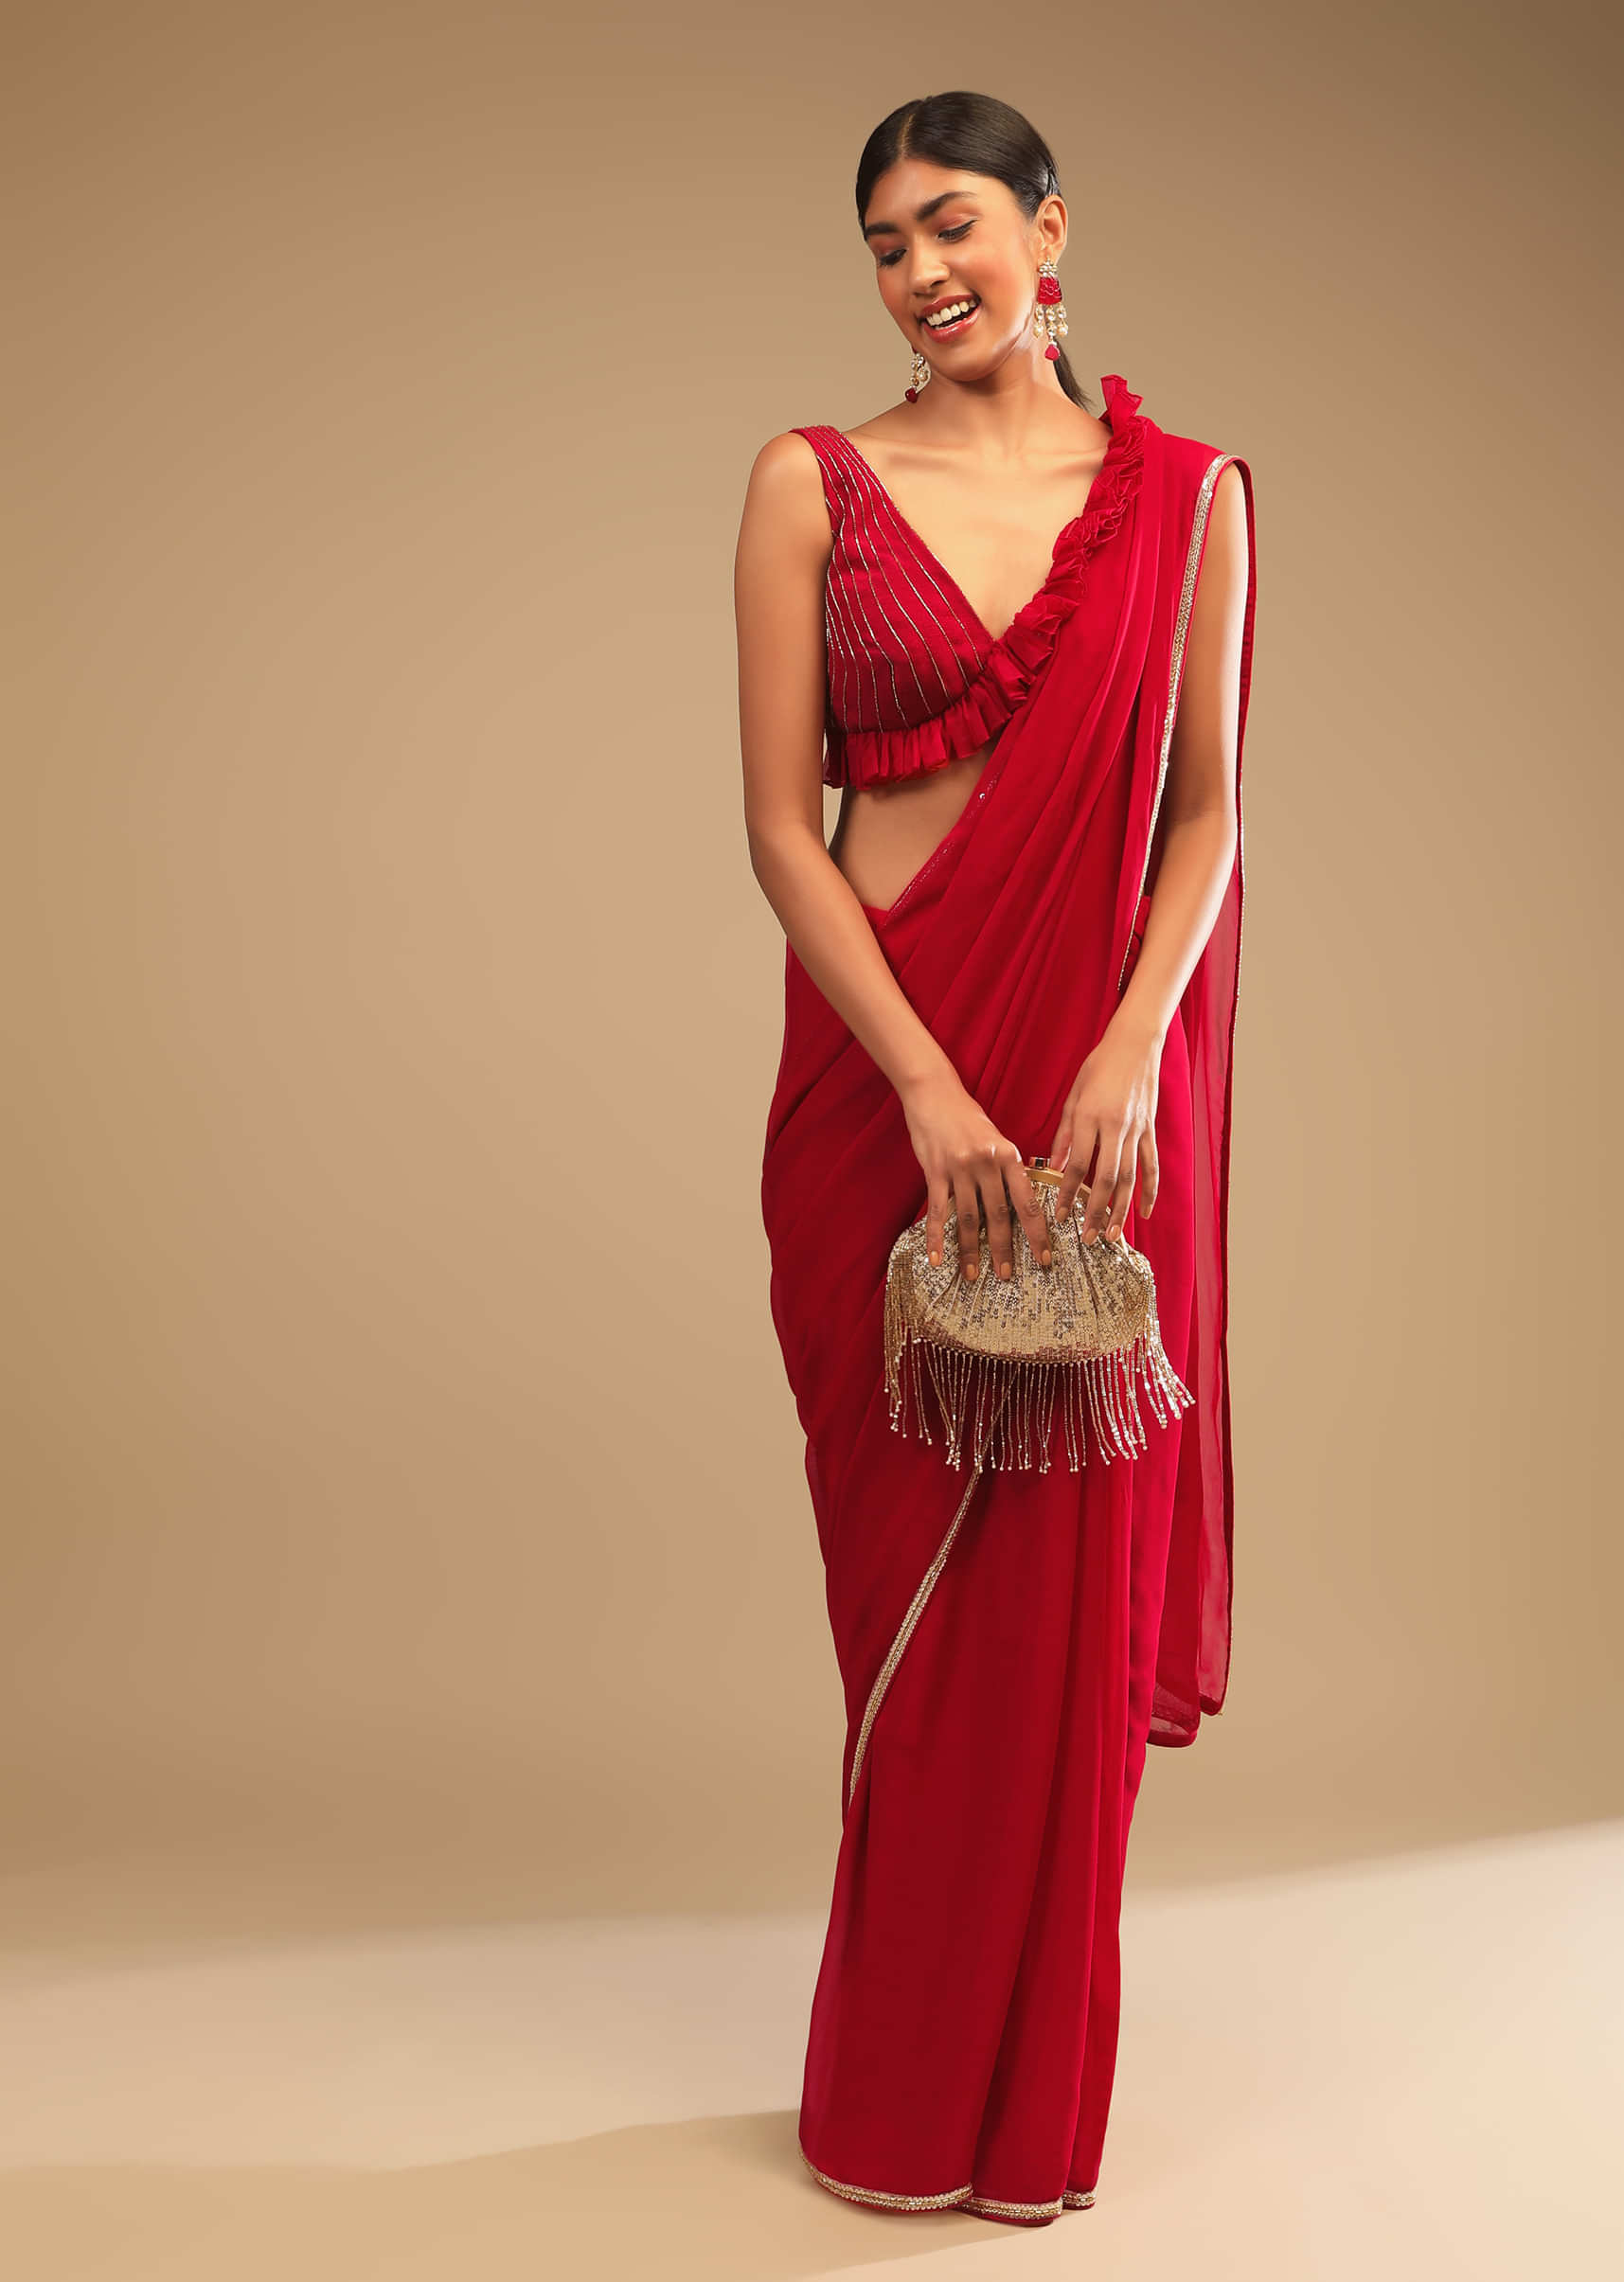 Cherry Red Saree In Georgette With Sequins And Cut Dana Embellished Border And A Ruffle Frill Adorned Crop Top  